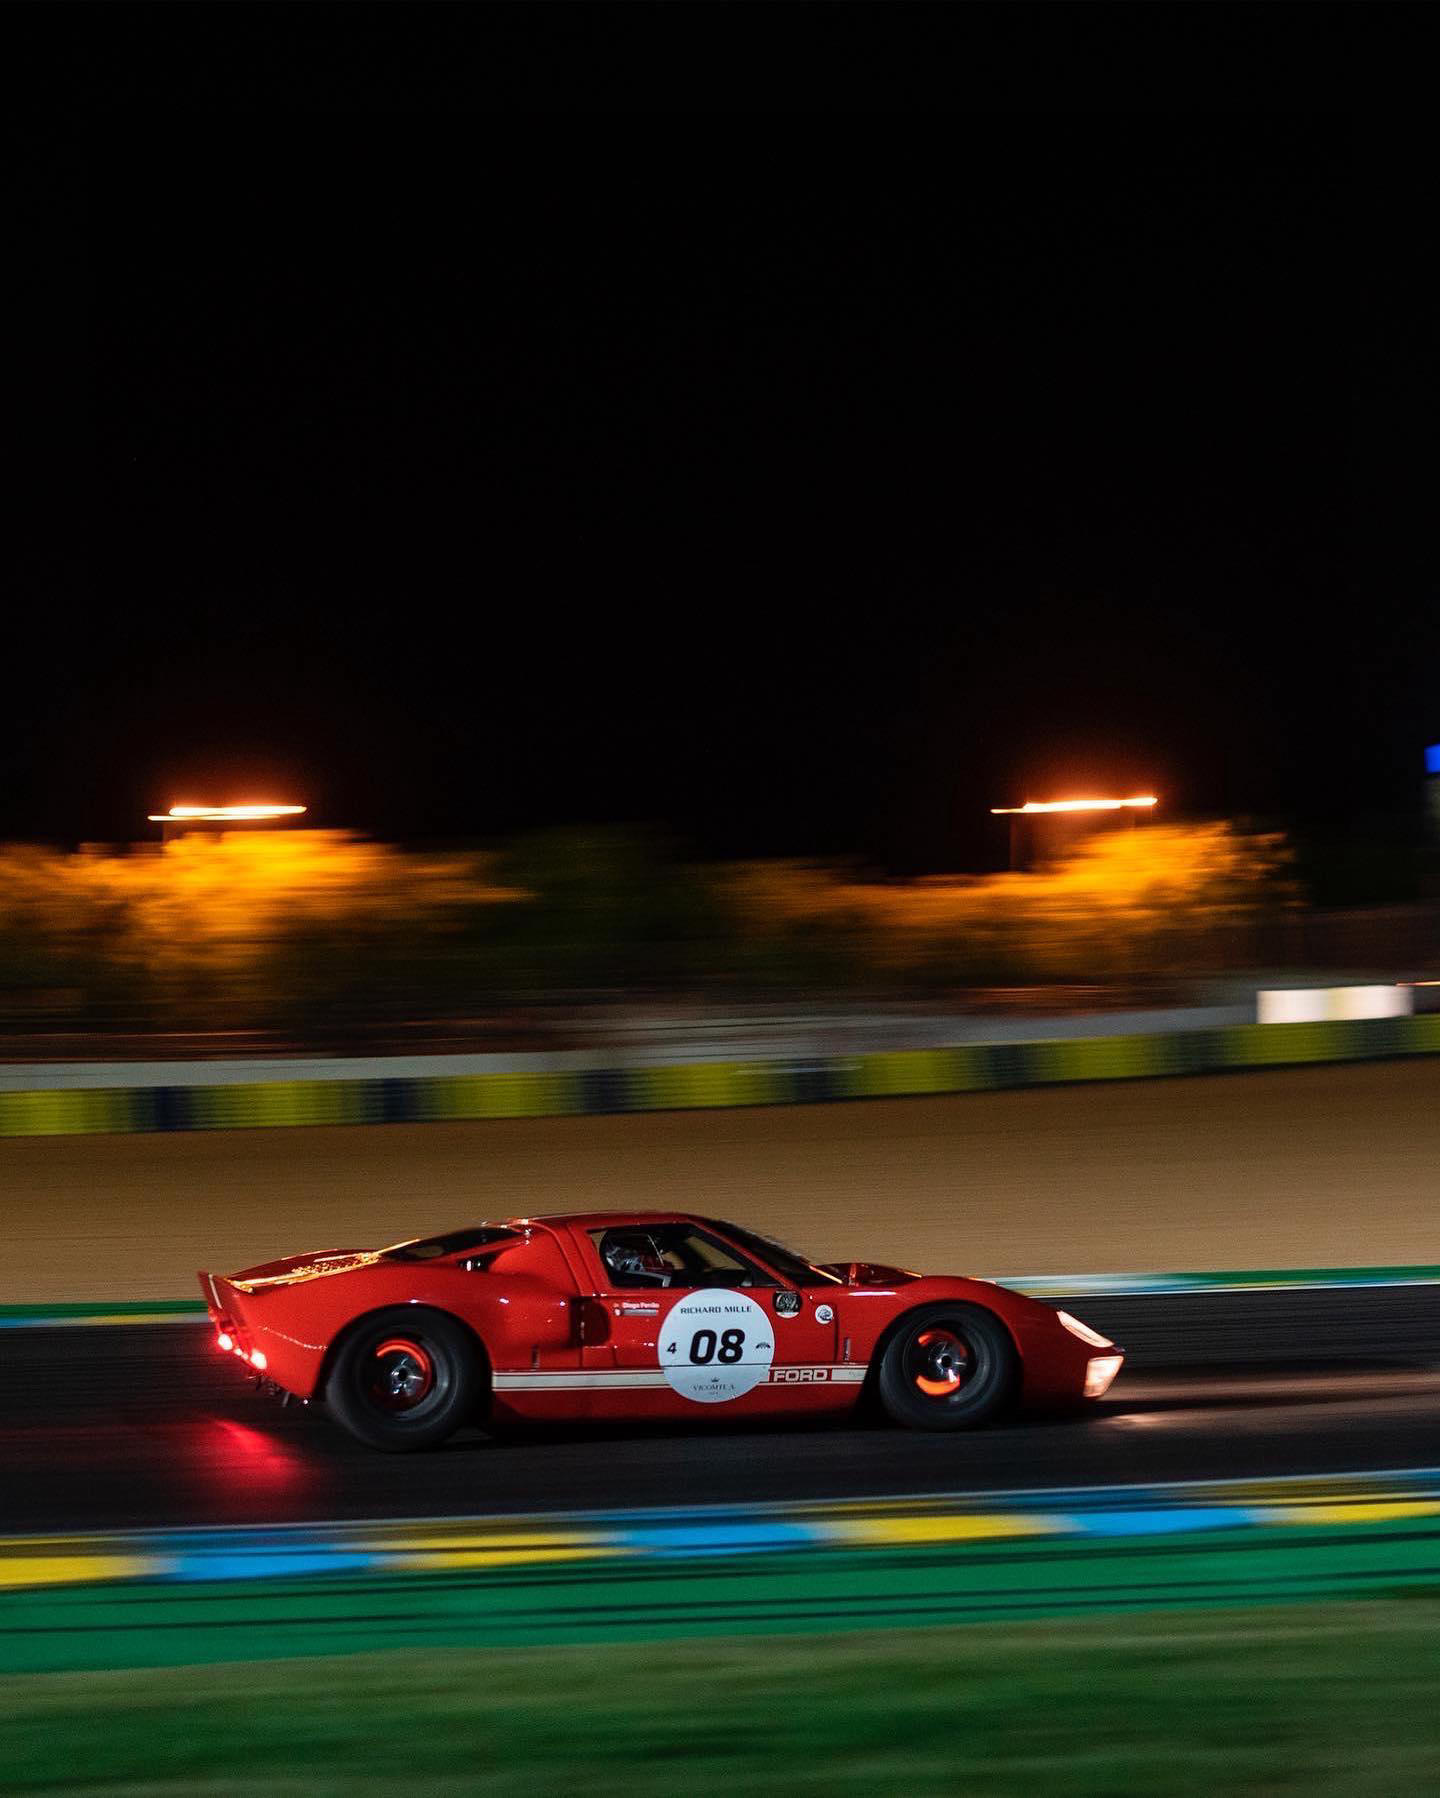 Richard Mille - Some creatures come alive when the sun goes down… At #LeMansClassic the incredible s